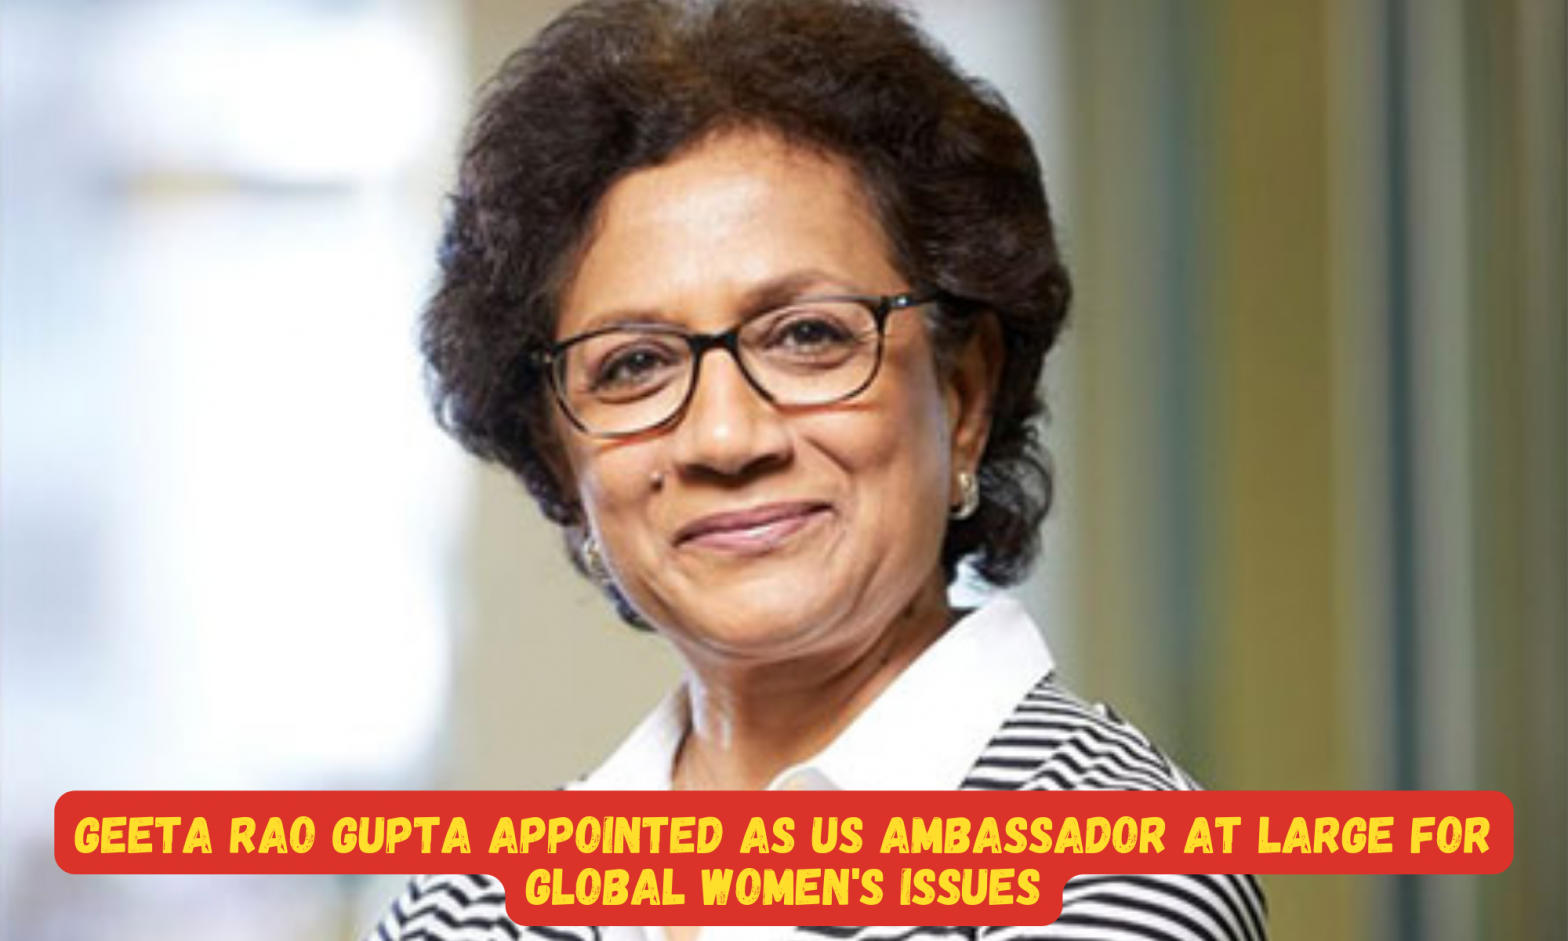 Geeta Rao Gupta appointed as US Ambassador at Large for Global Women's Issues